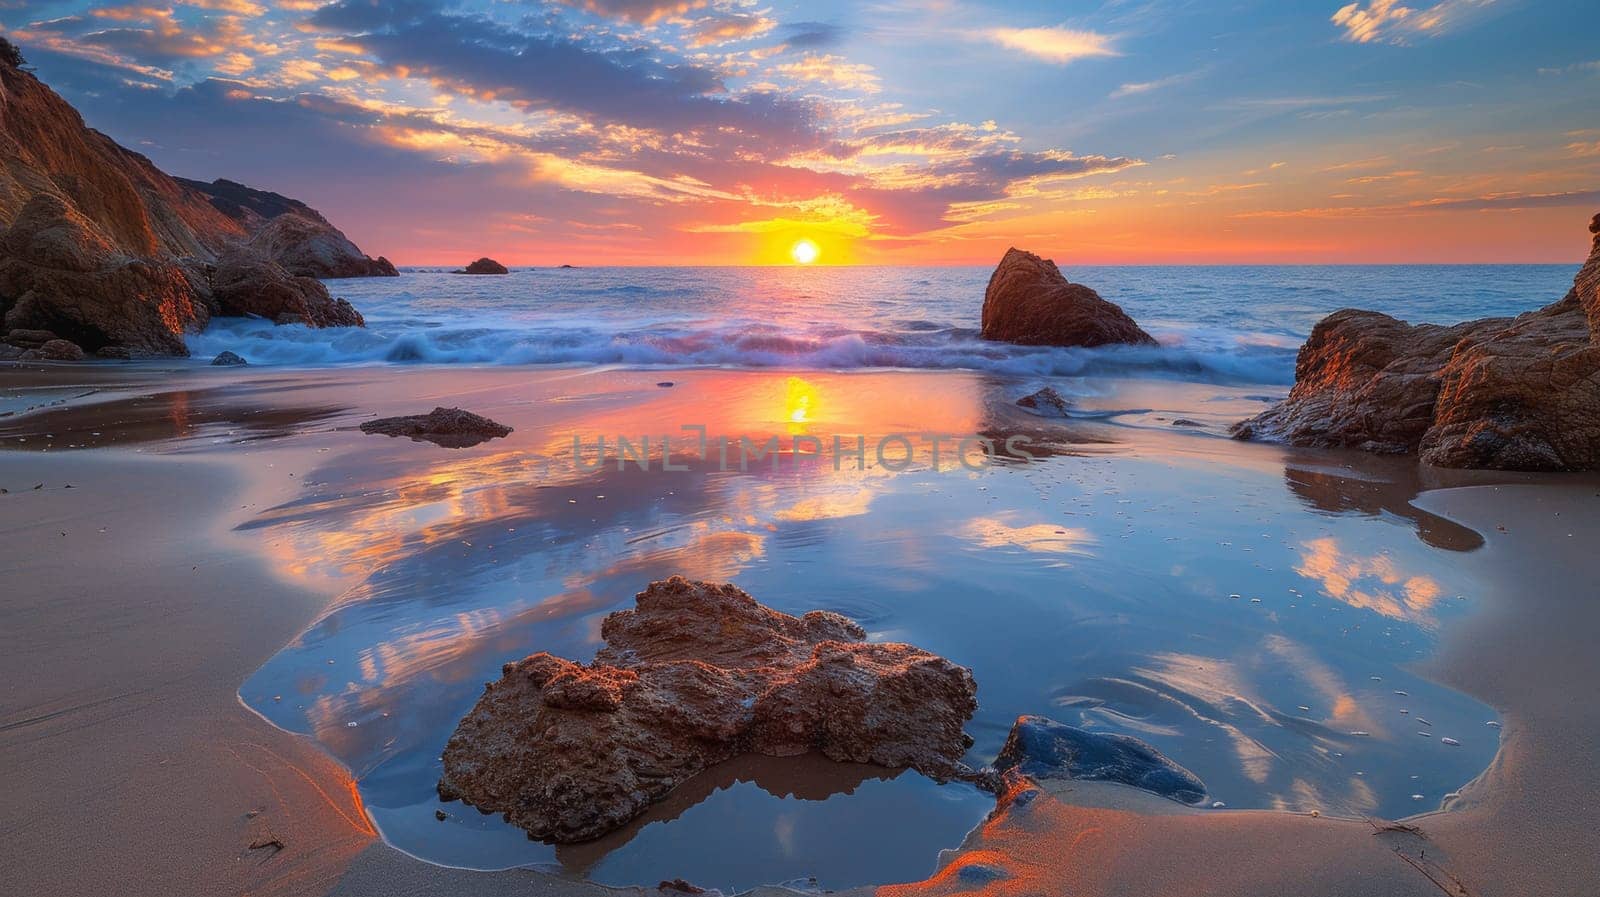 A sunset over a beach with rocks and water, AI by starush